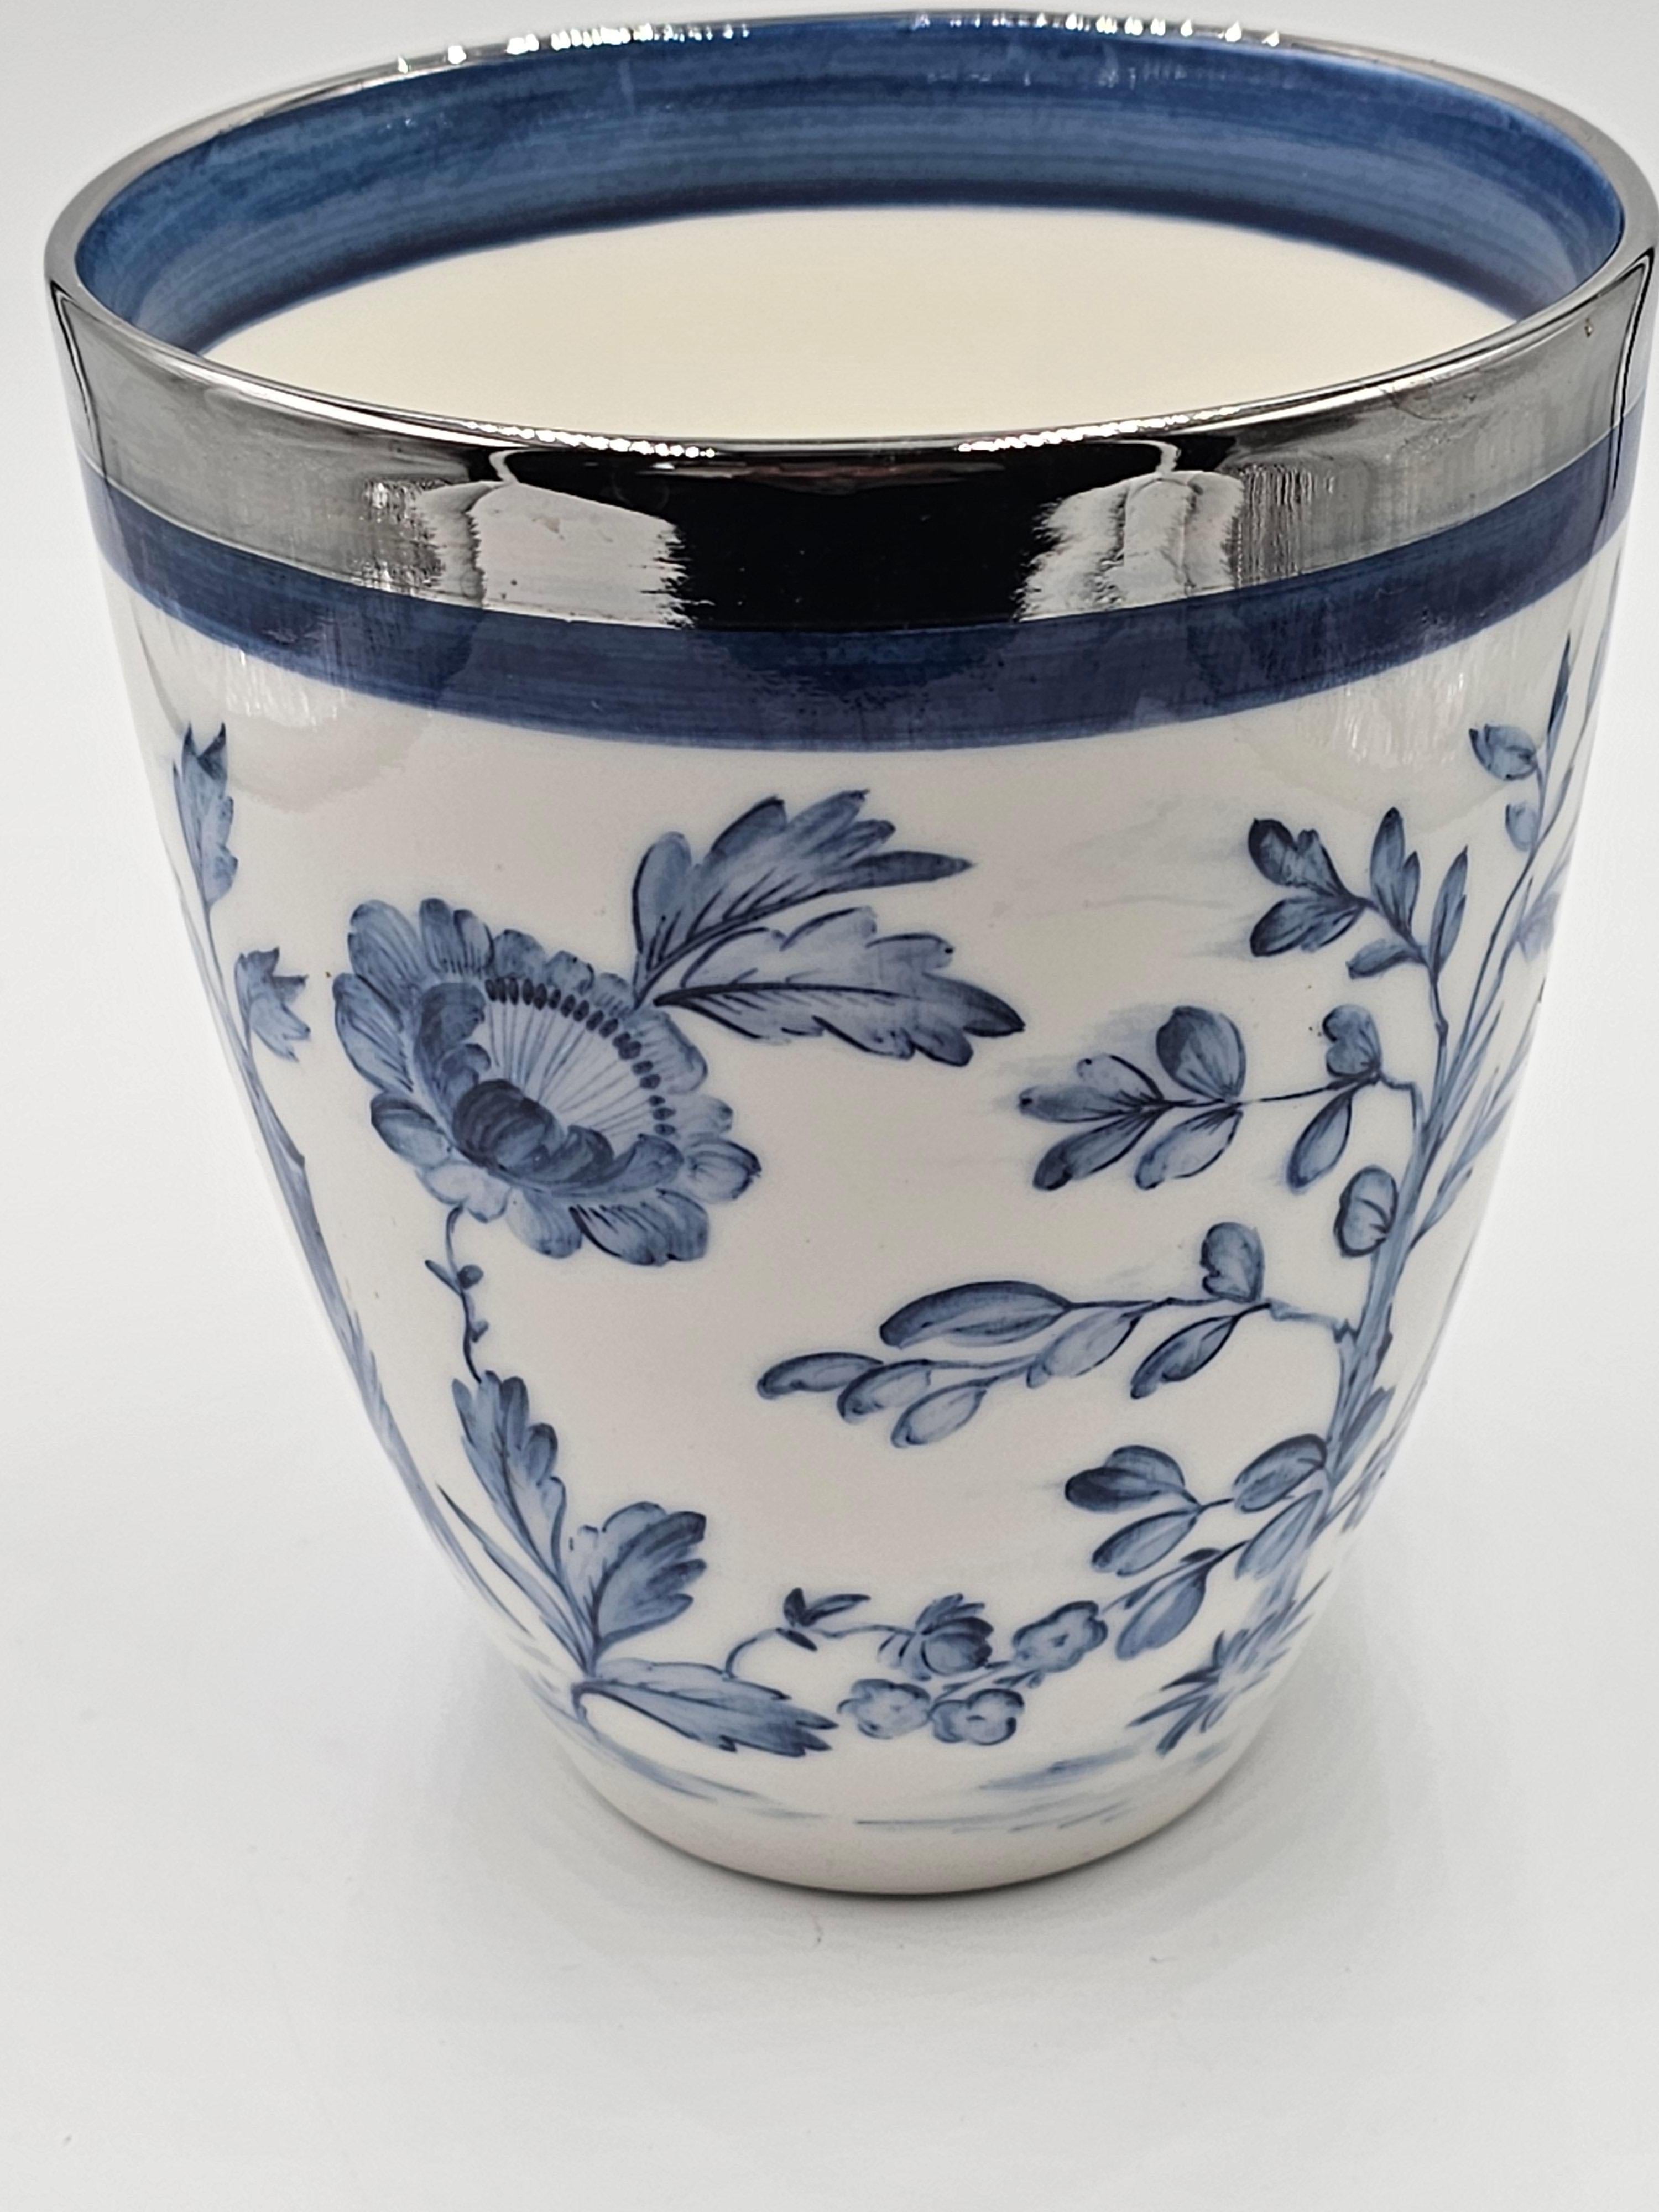 Hands-free painted porcelain vase with a chinoiserie decor all around. Rimmed with a platinum rim. Completely made by hand in Bavaria/Germany with exclusive decors for Sofina Boutique Kitzbühel.
Looks beautiful with fresh flowers or with